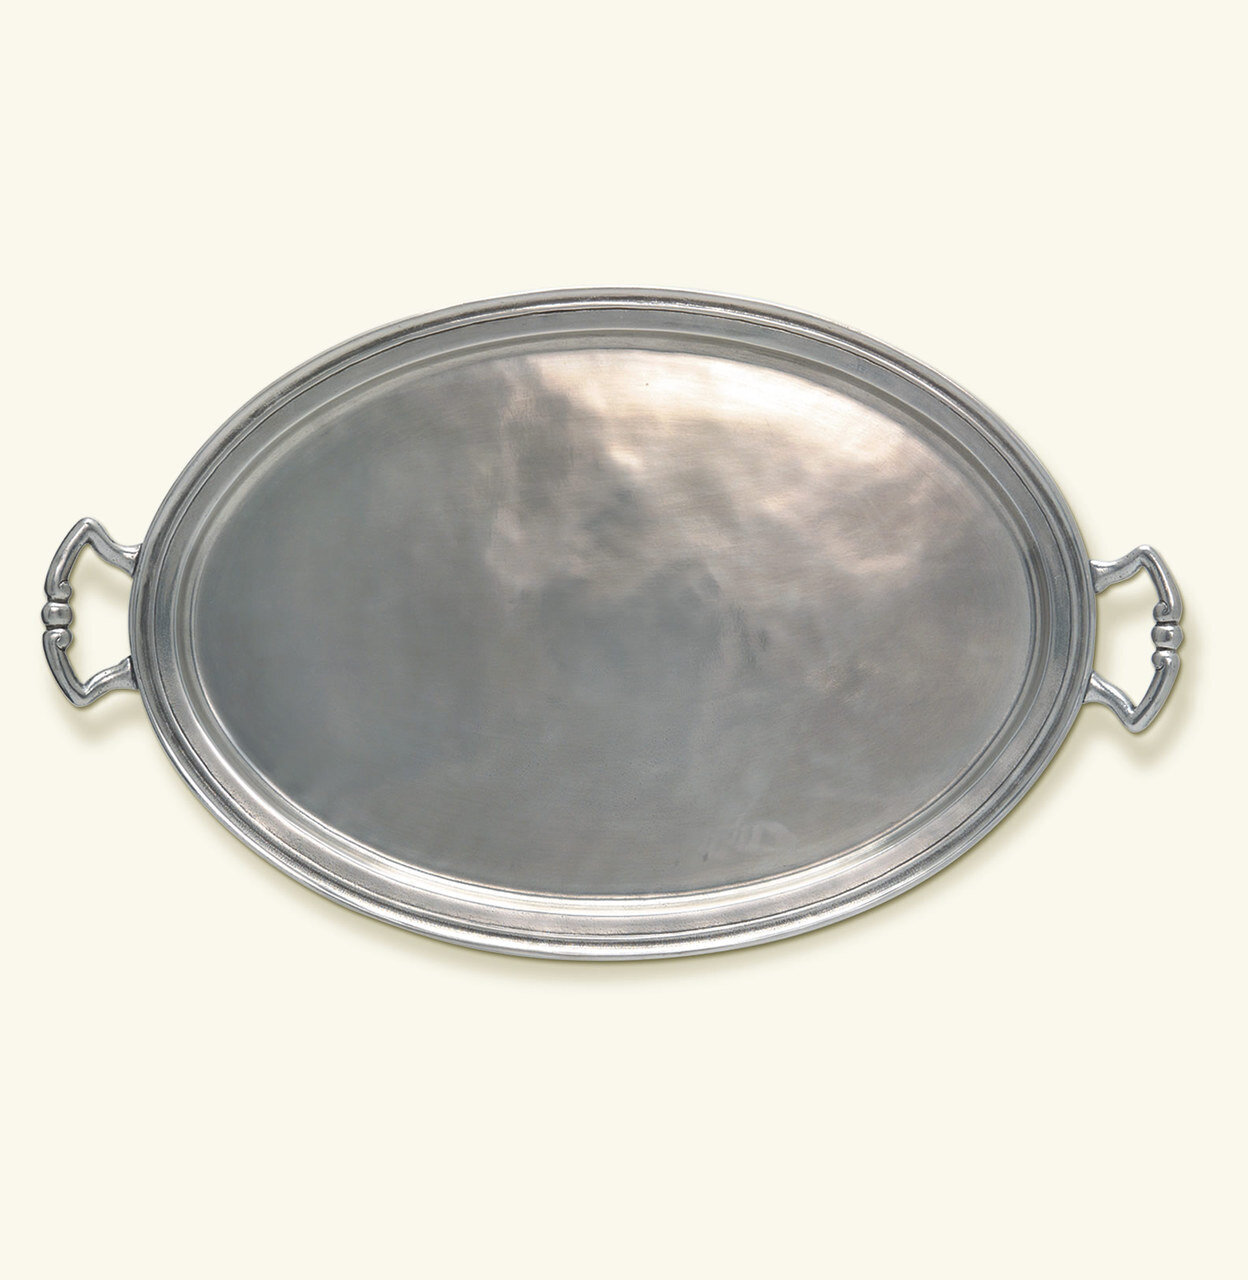 Match Pewter Oval Tray With Handles X-Large 1130.1